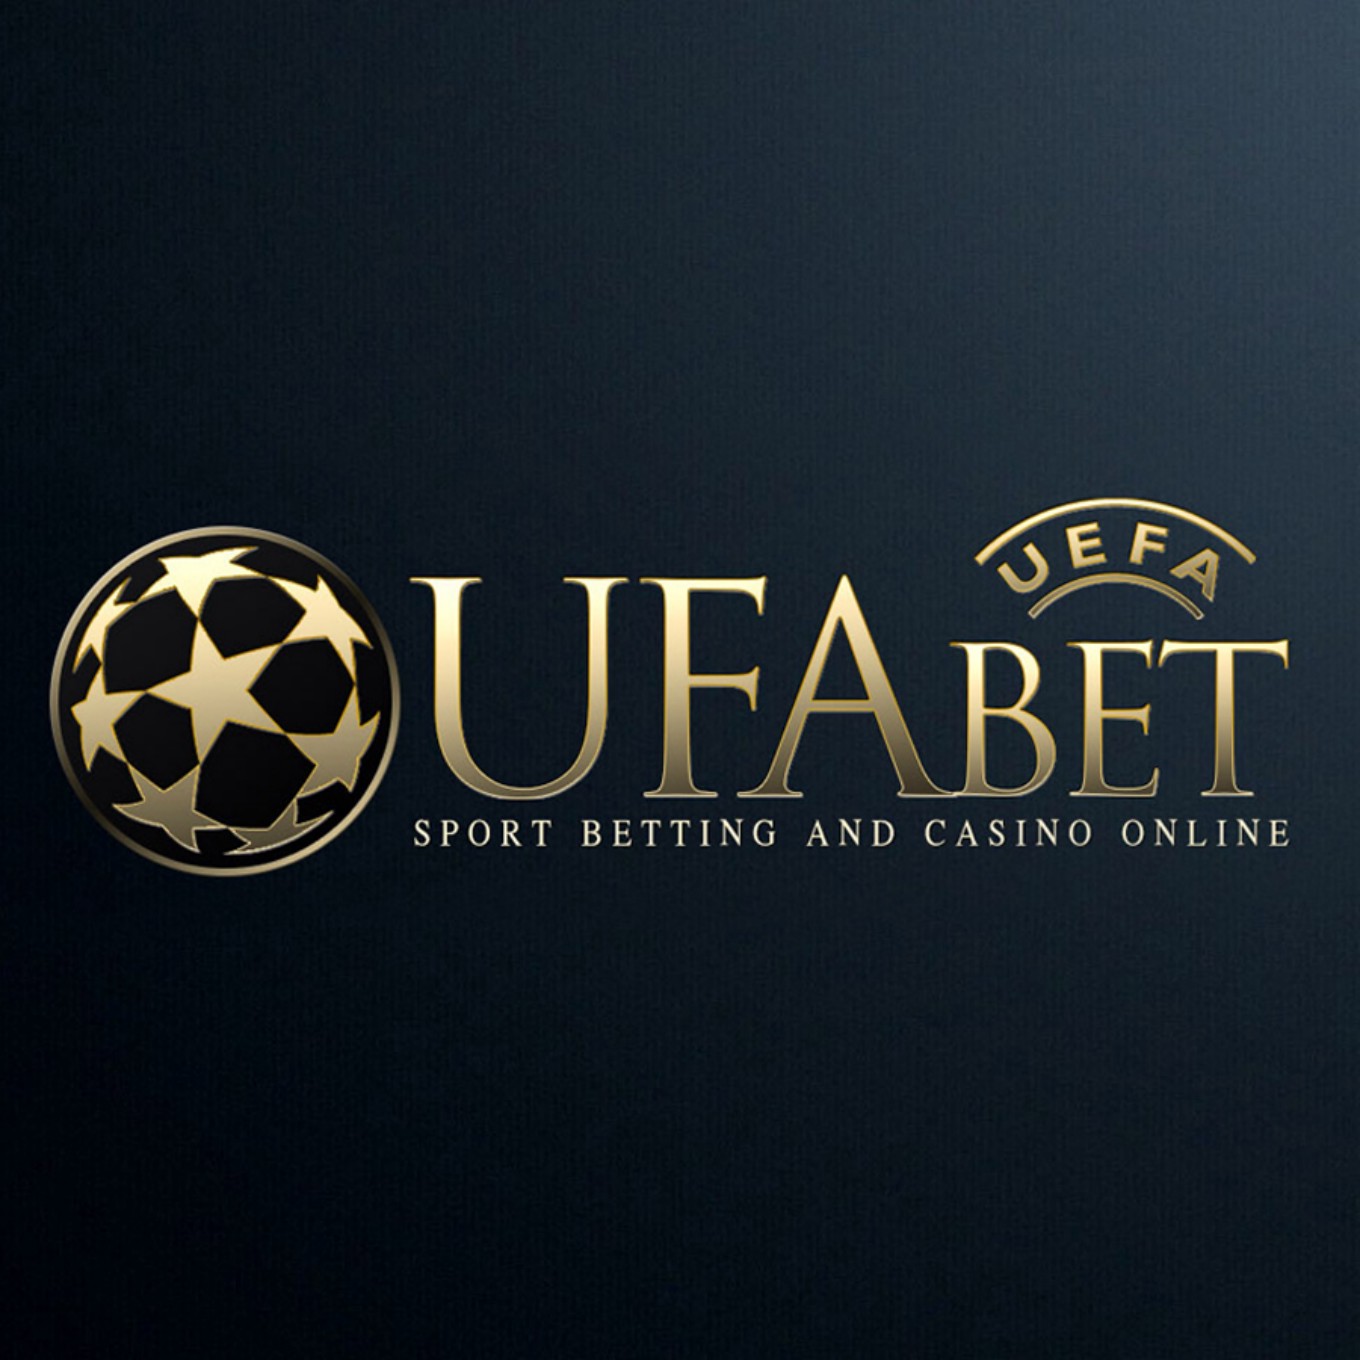 For the most demanding fans and customers of sports betting, UFABET